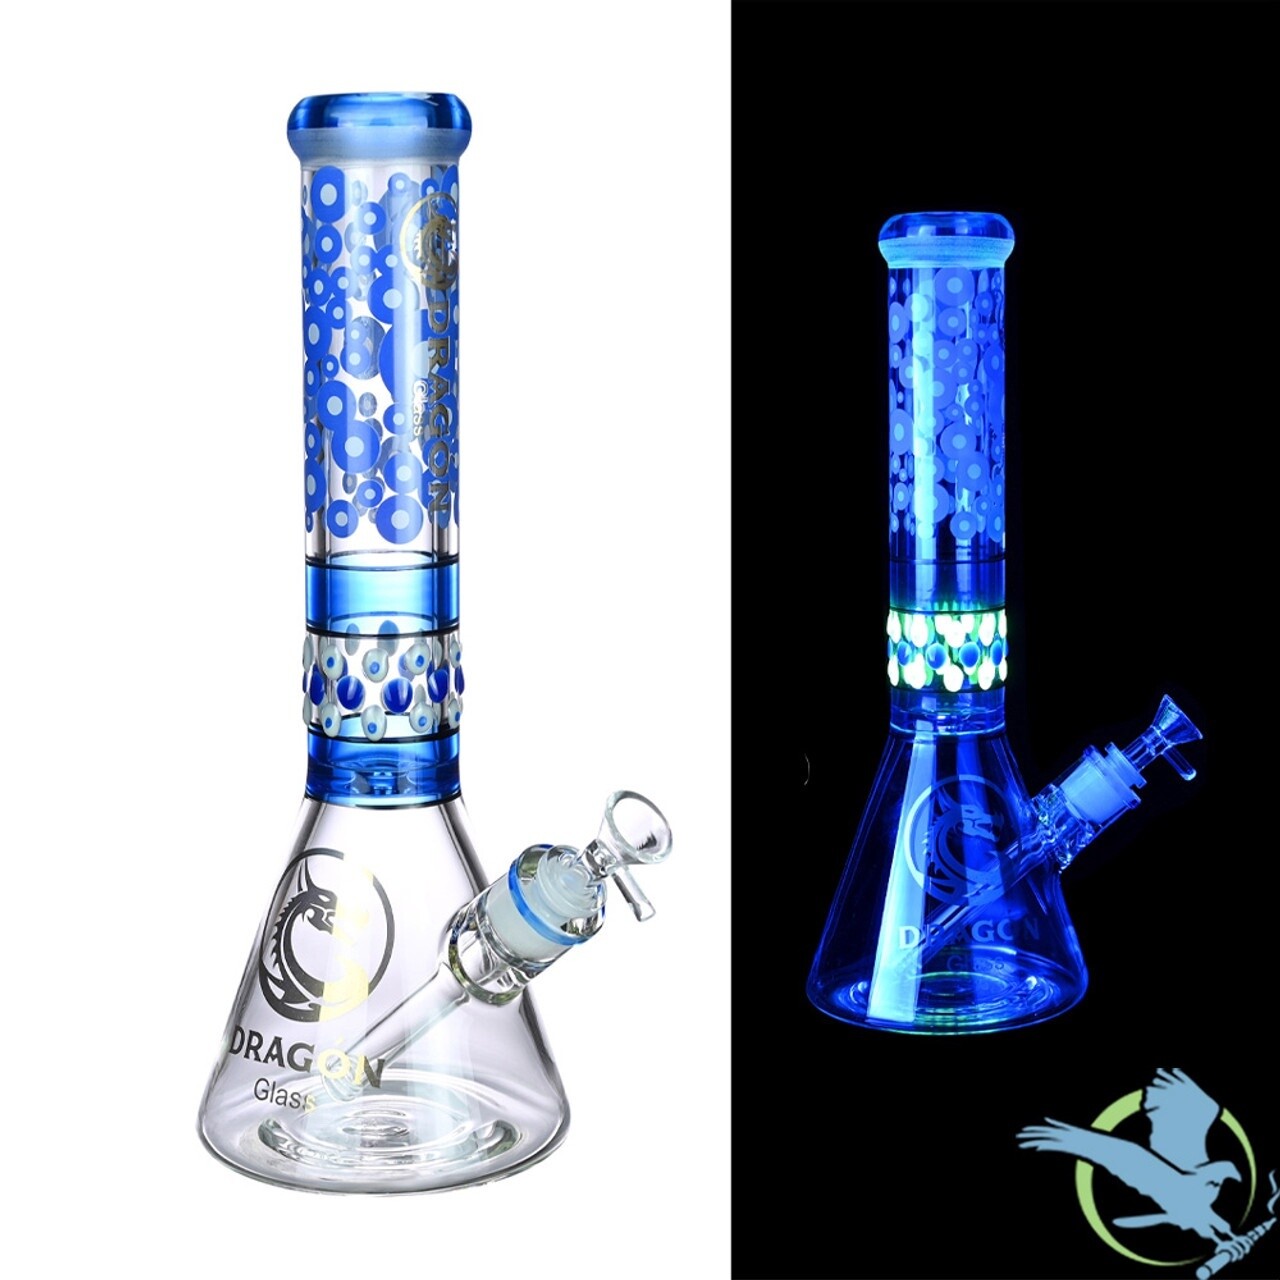 Dragon Glass Water Pipe Bubbles Beaker Base Design With Diffused Downstem - 13.5 Inches